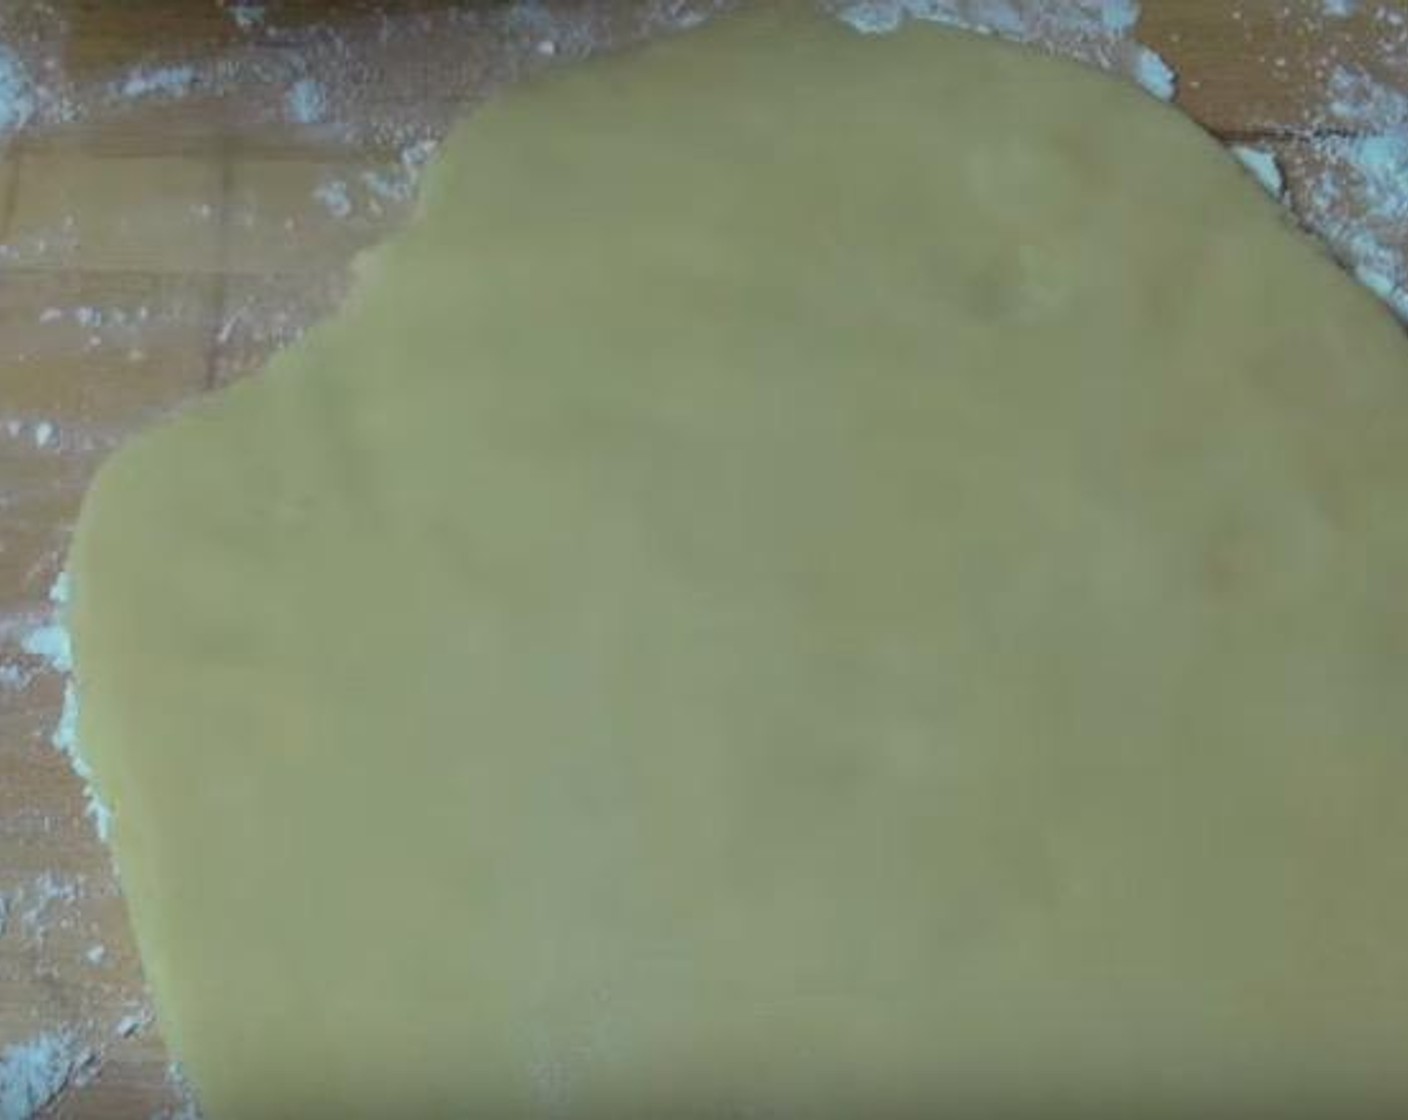 step 4 Using a rolling pin, gently roll the dough out on a floured surface, until it is about 1 centimeter thick.